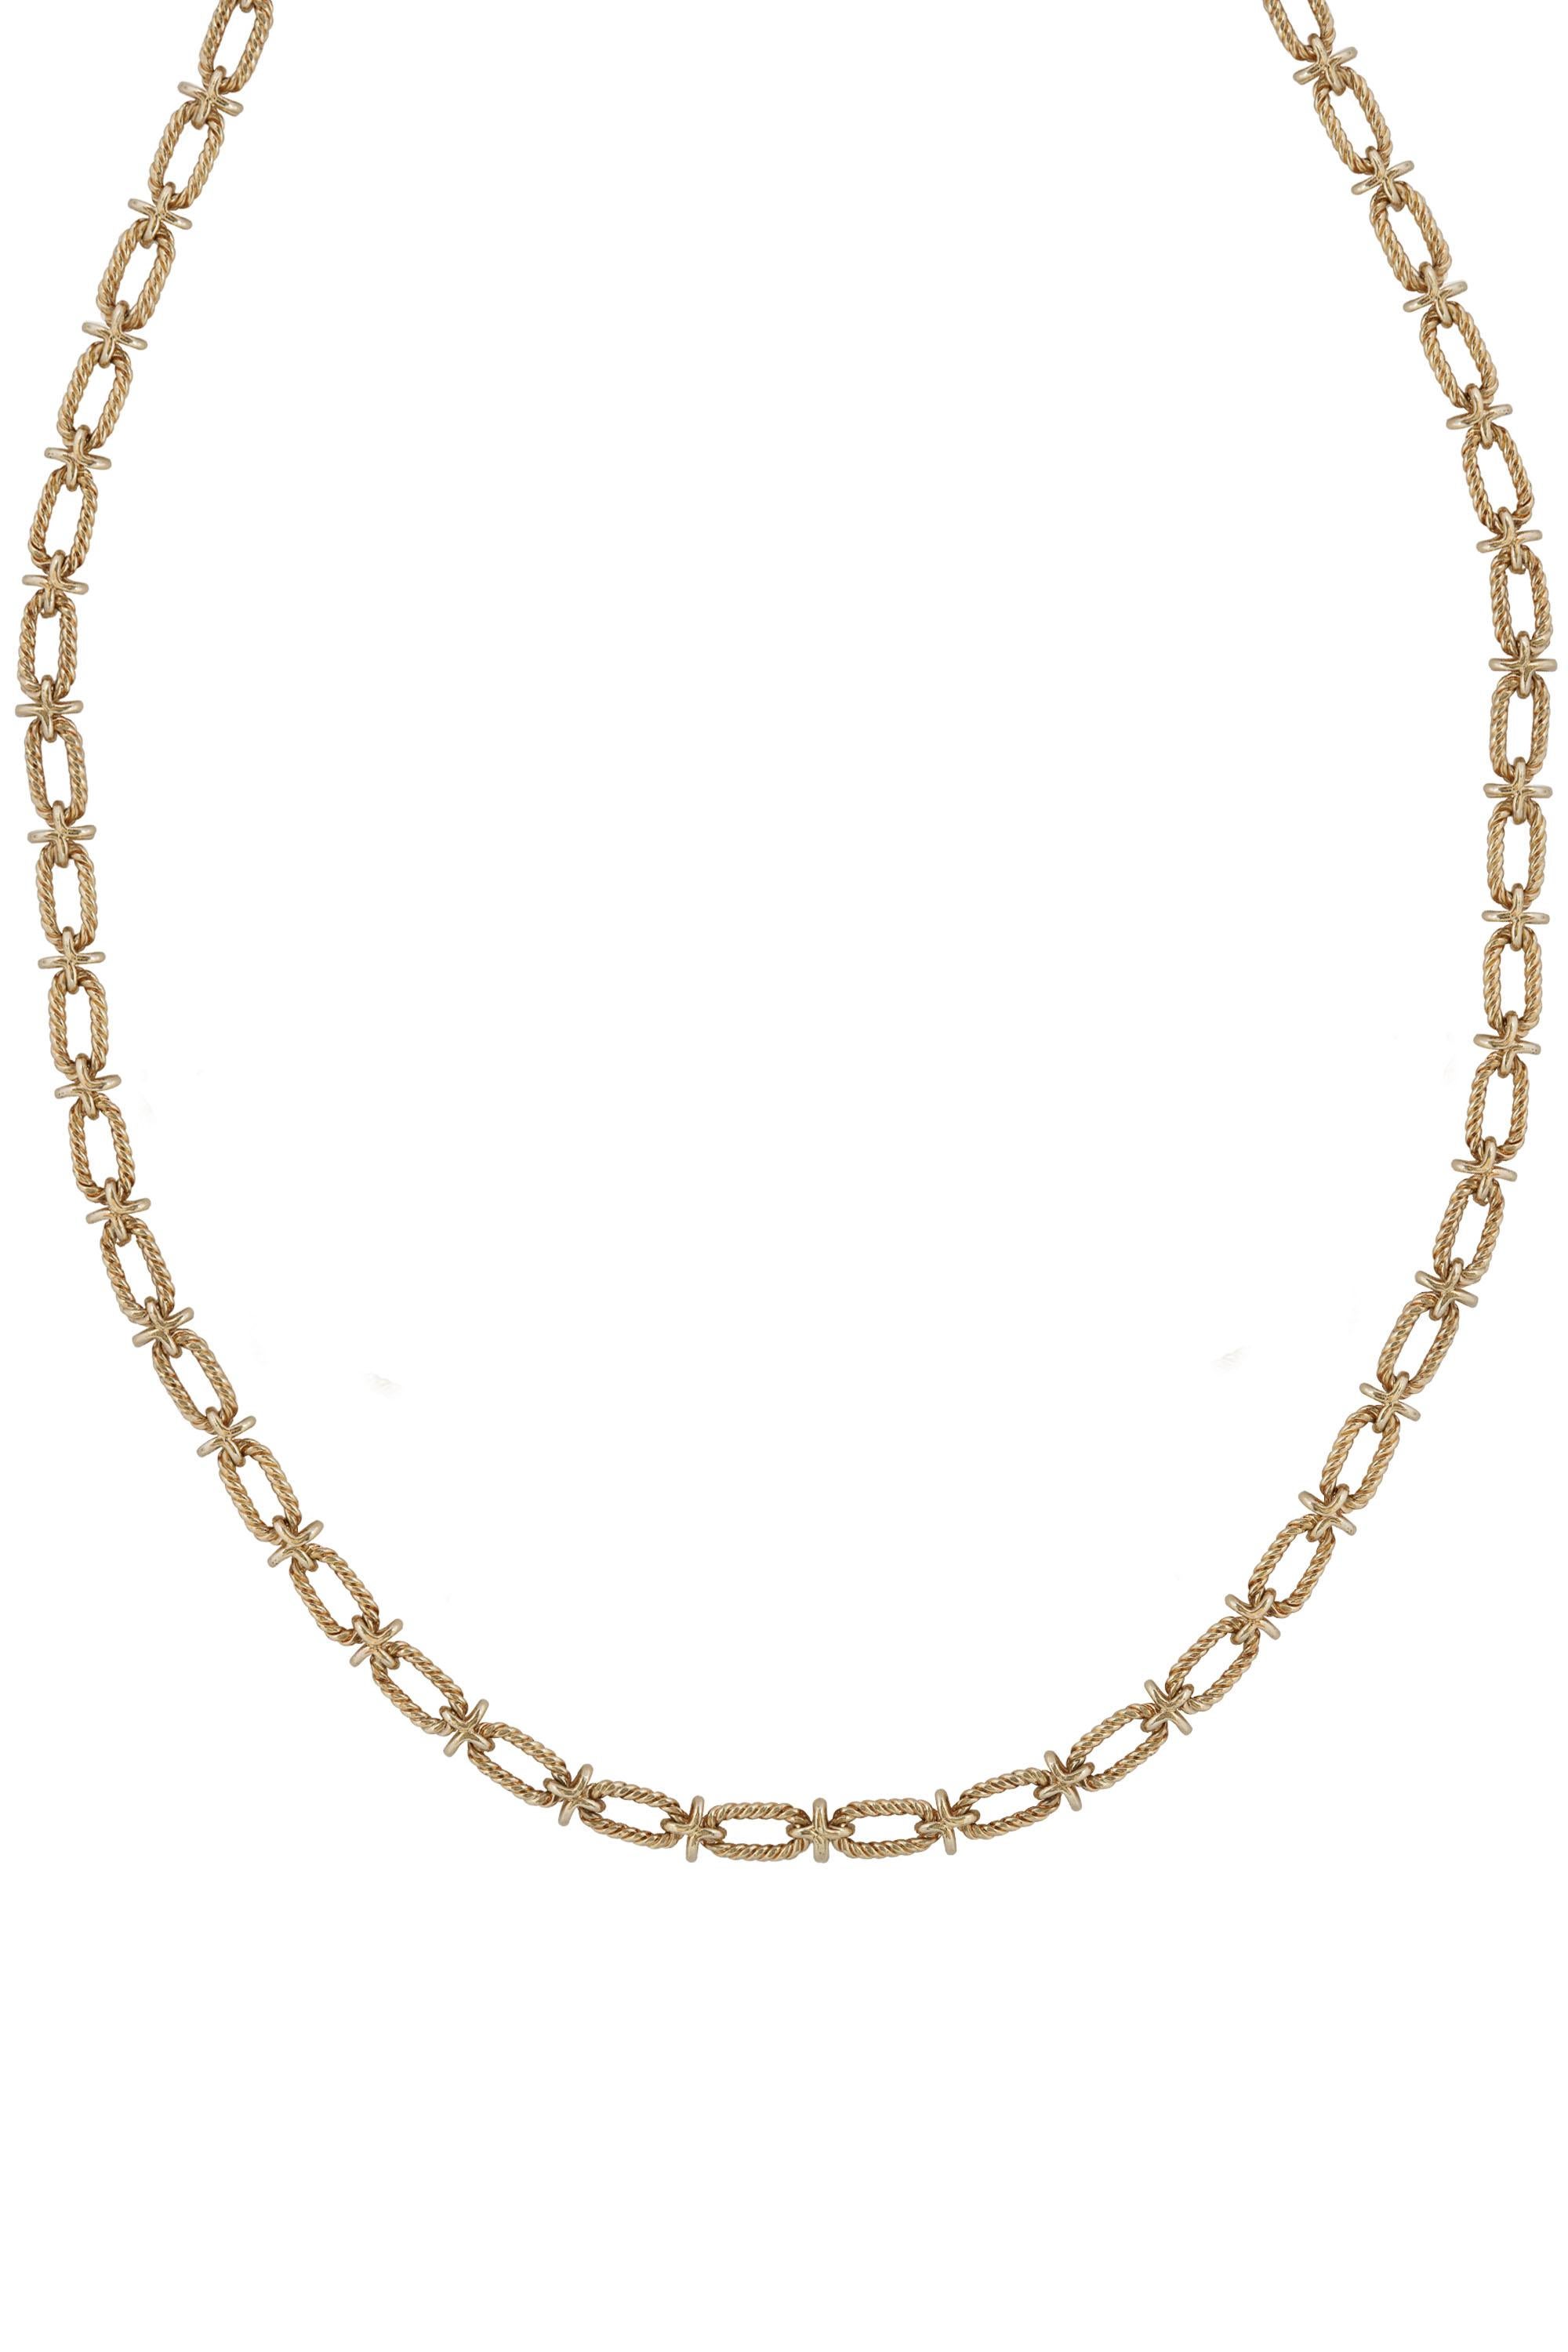 This exquisite vintage set from Tiffany & Co is a stunning example of timeless design. Crafted entirely from 14 carat yellow gold, the necklace and bracelet set comprises a rope-textured oval link alternating with signature 